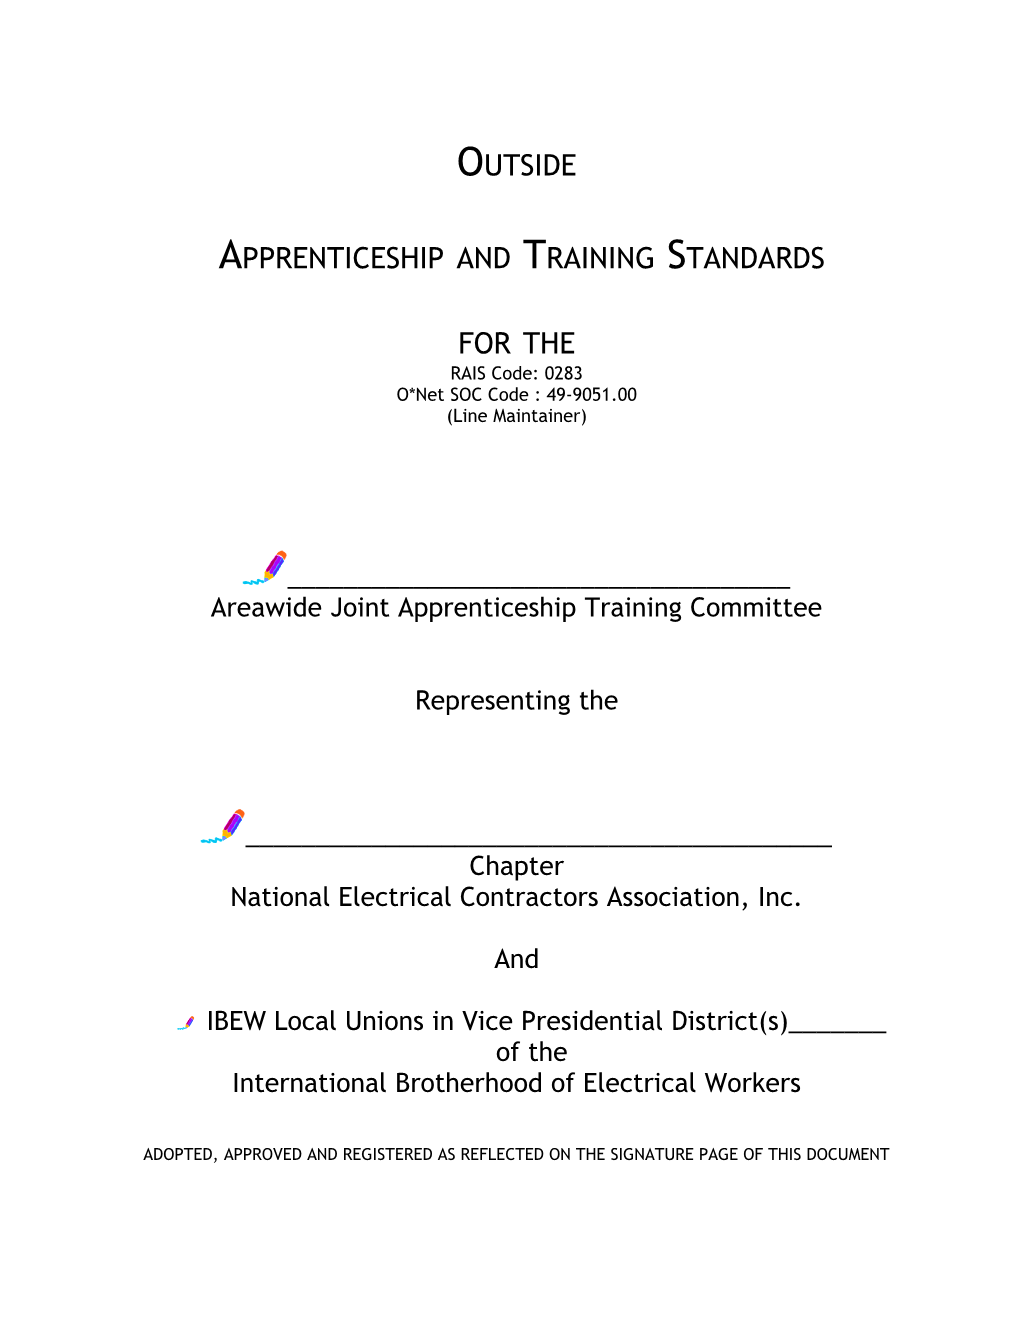 National Guidline Apprenticeship and Training Standards